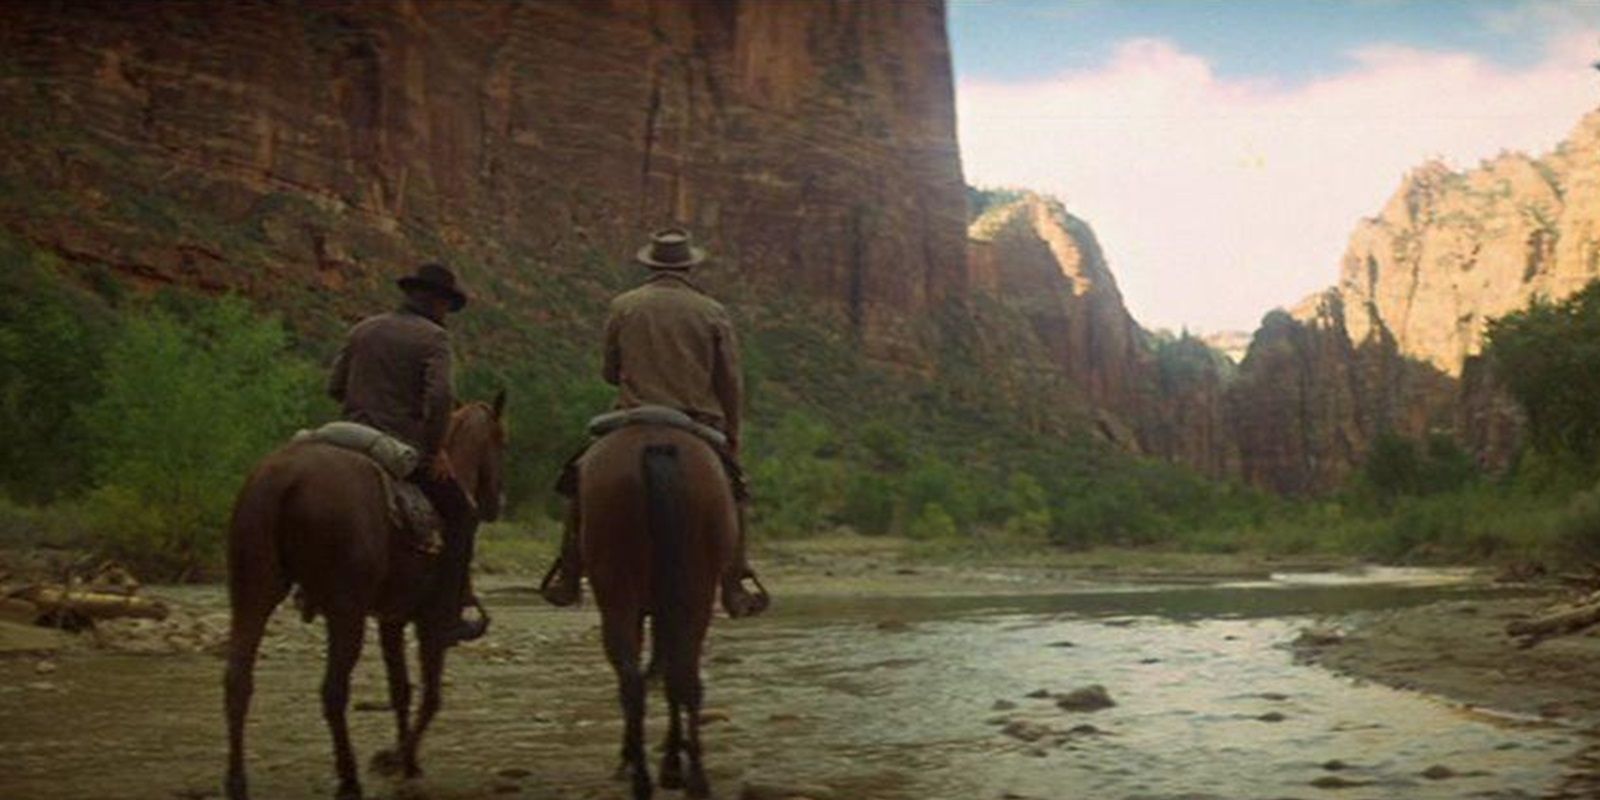 Butch and Sundance ride through a canyon in Butch Cassidy and the Sundance Kid